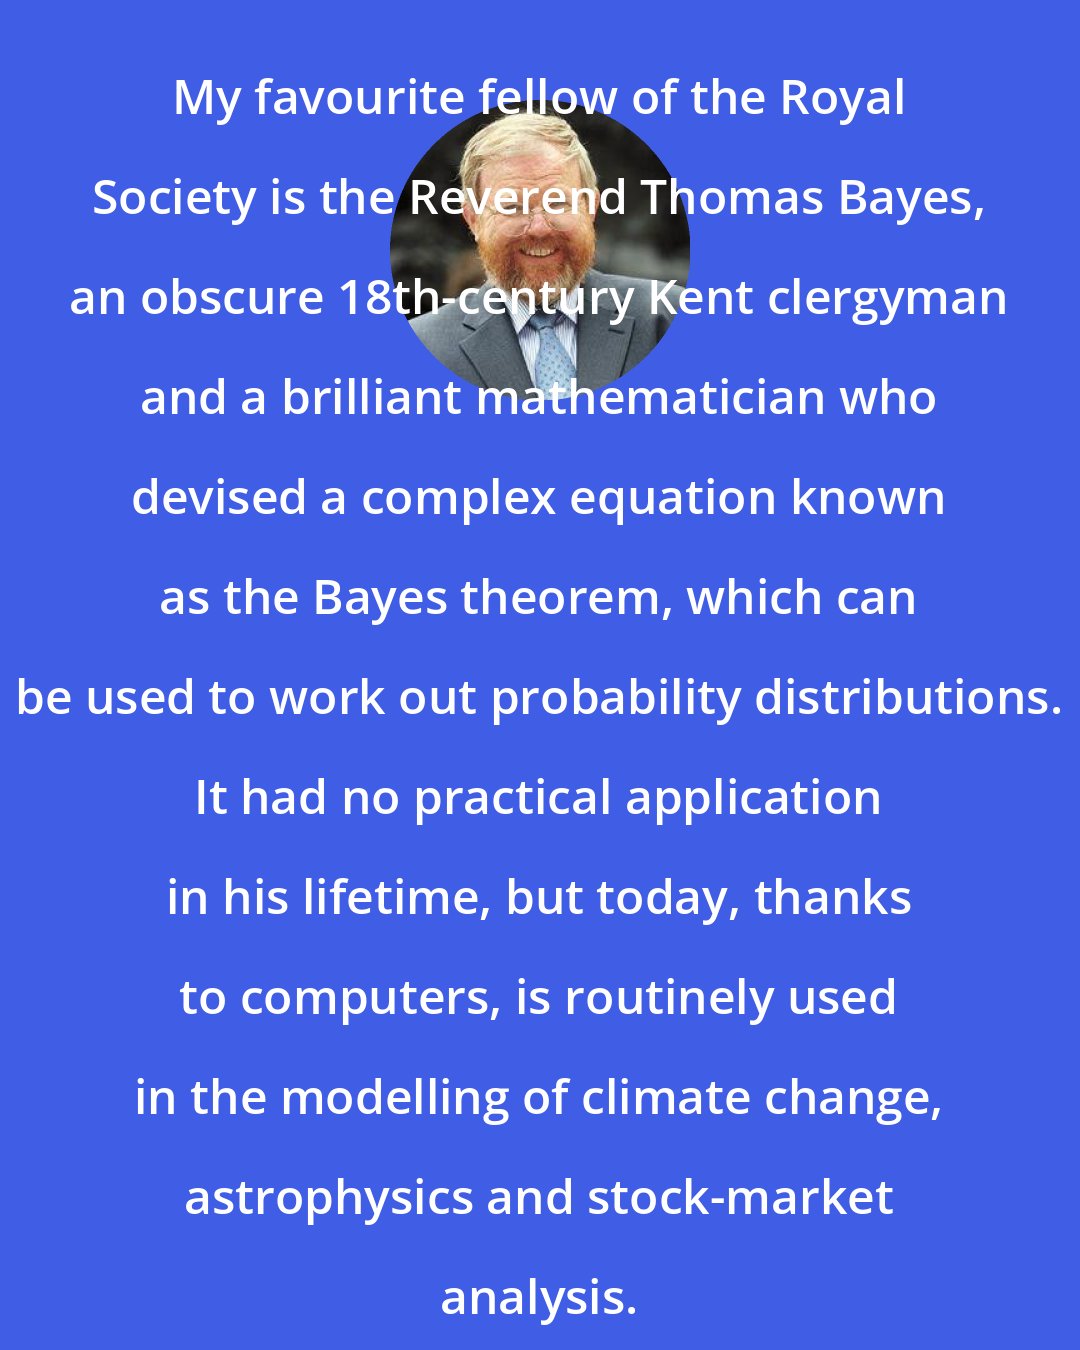 Bill Bryson: My favourite fellow of the Royal Society is the Reverend Thomas Bayes, an obscure 18th-century Kent clergyman and a brilliant mathematician who devised a complex equation known as the Bayes theorem, which can be used to work out probability distributions. It had no practical application in his lifetime, but today, thanks to computers, is routinely used in the modelling of climate change, astrophysics and stock-market analysis.